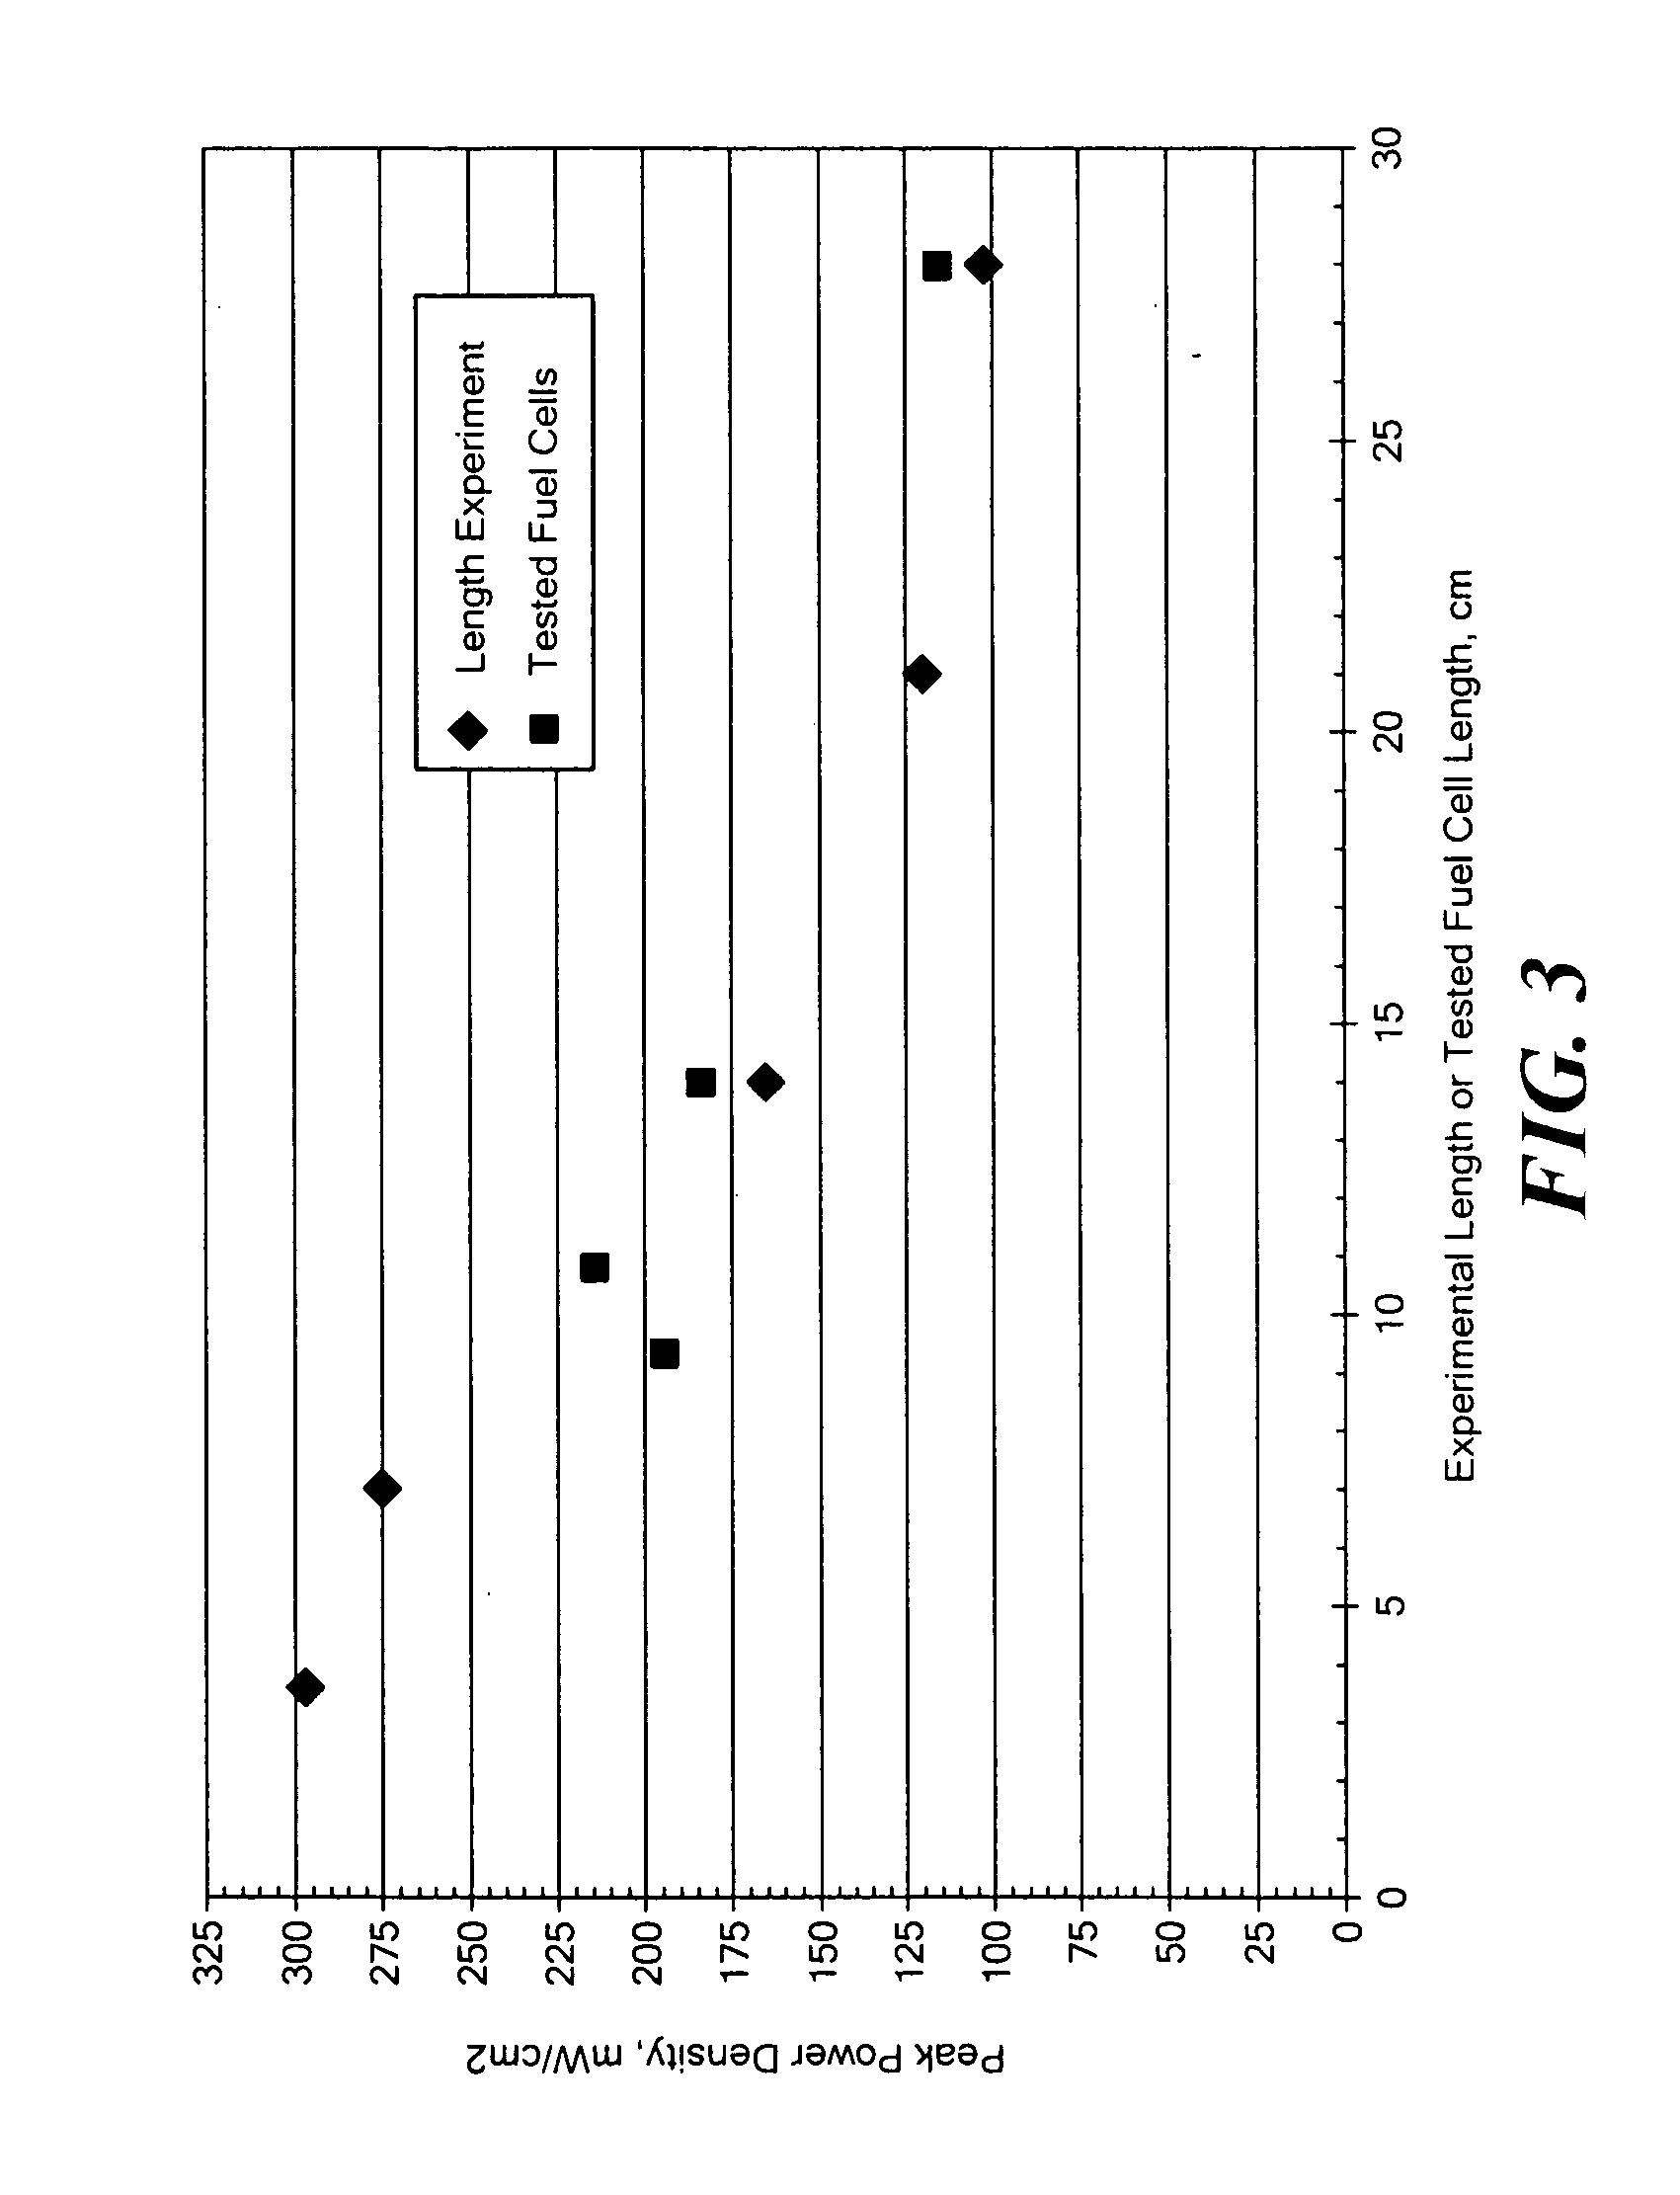 Current collection in anode supported tubular fuel cells